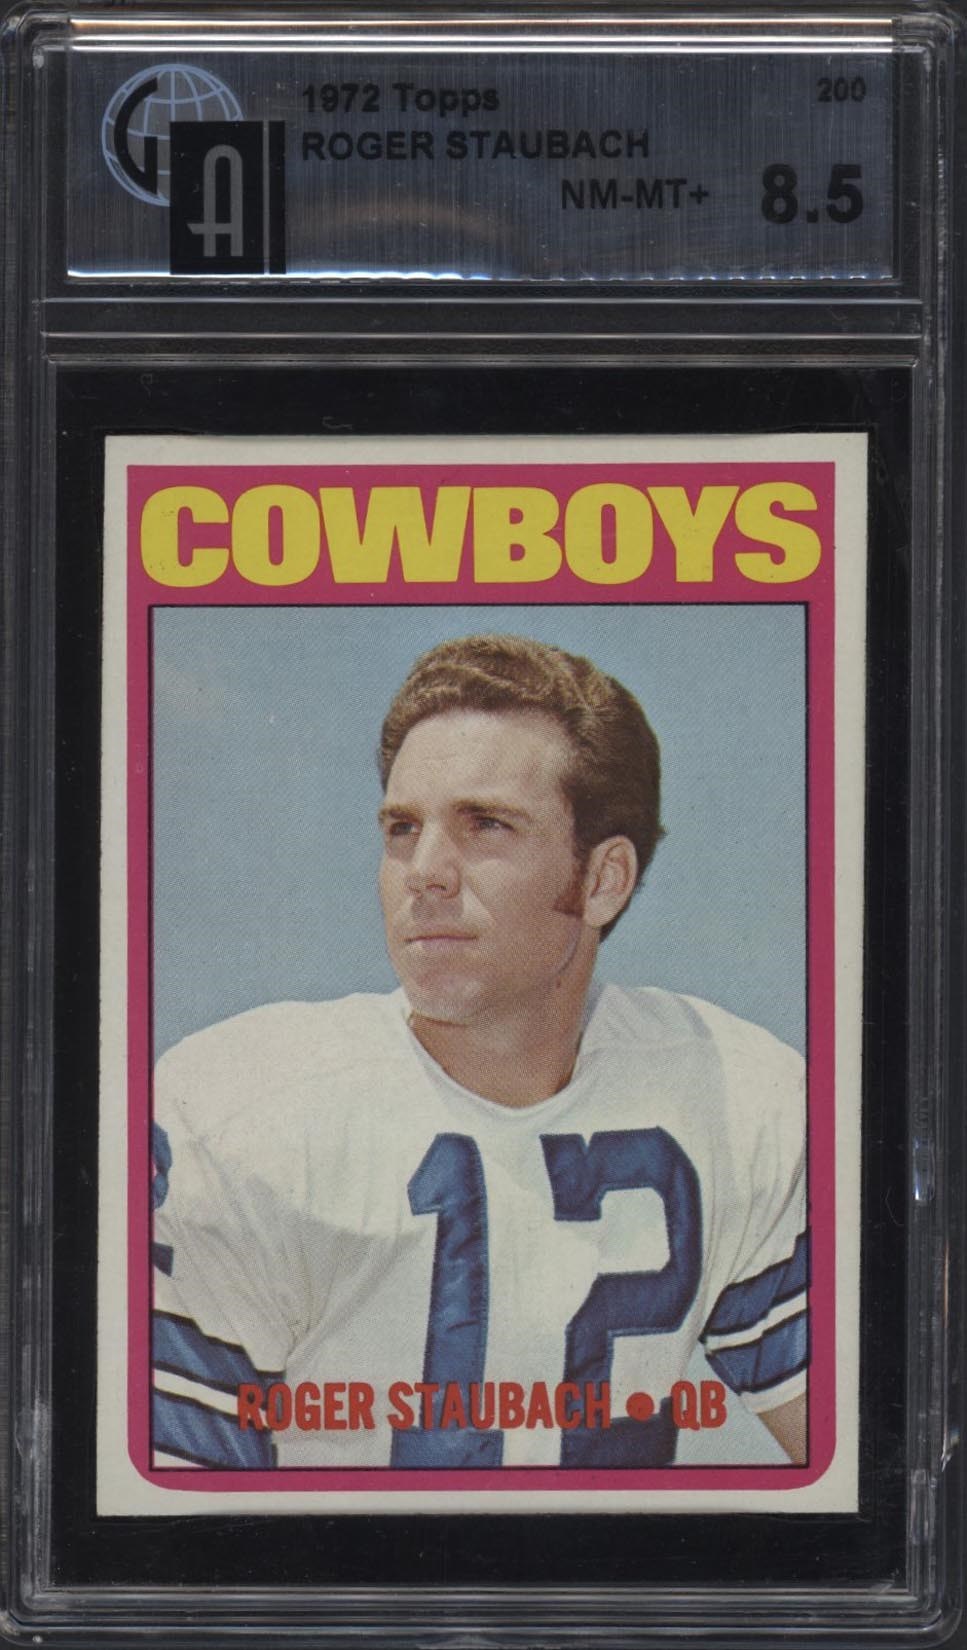 Baseball and Trading Cards - 1972 Topps #200 Roger Staubach Rookie Card - GAI NM-MT+ 8.5